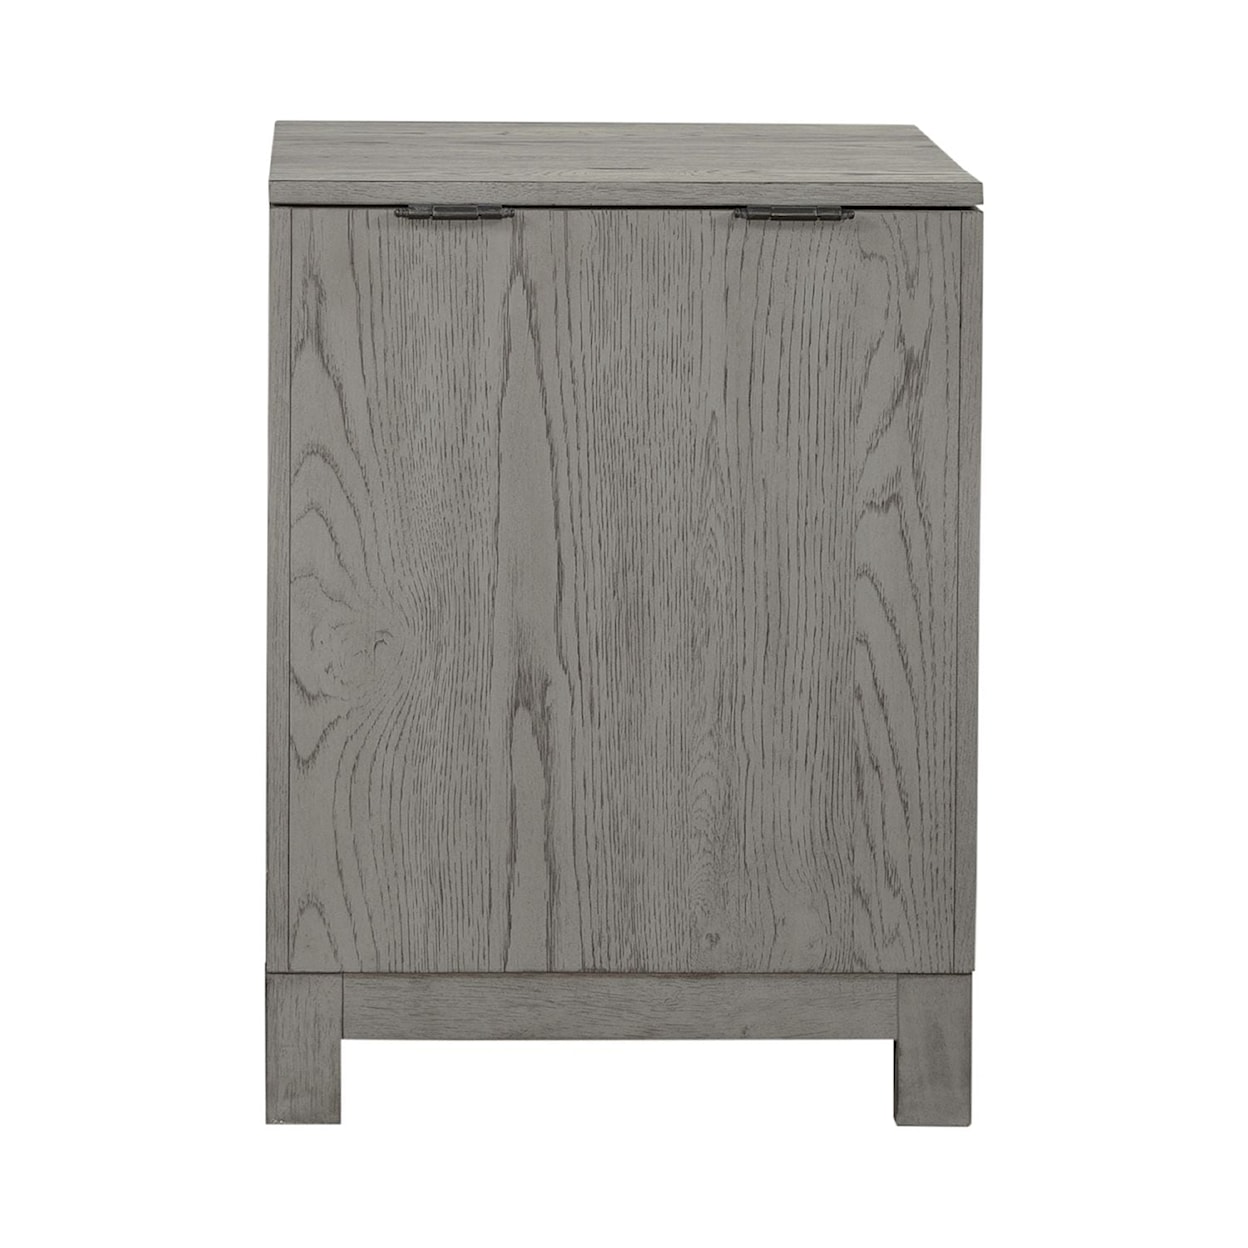 Libby Palmetto Heights 3-Drawer Chairside Table